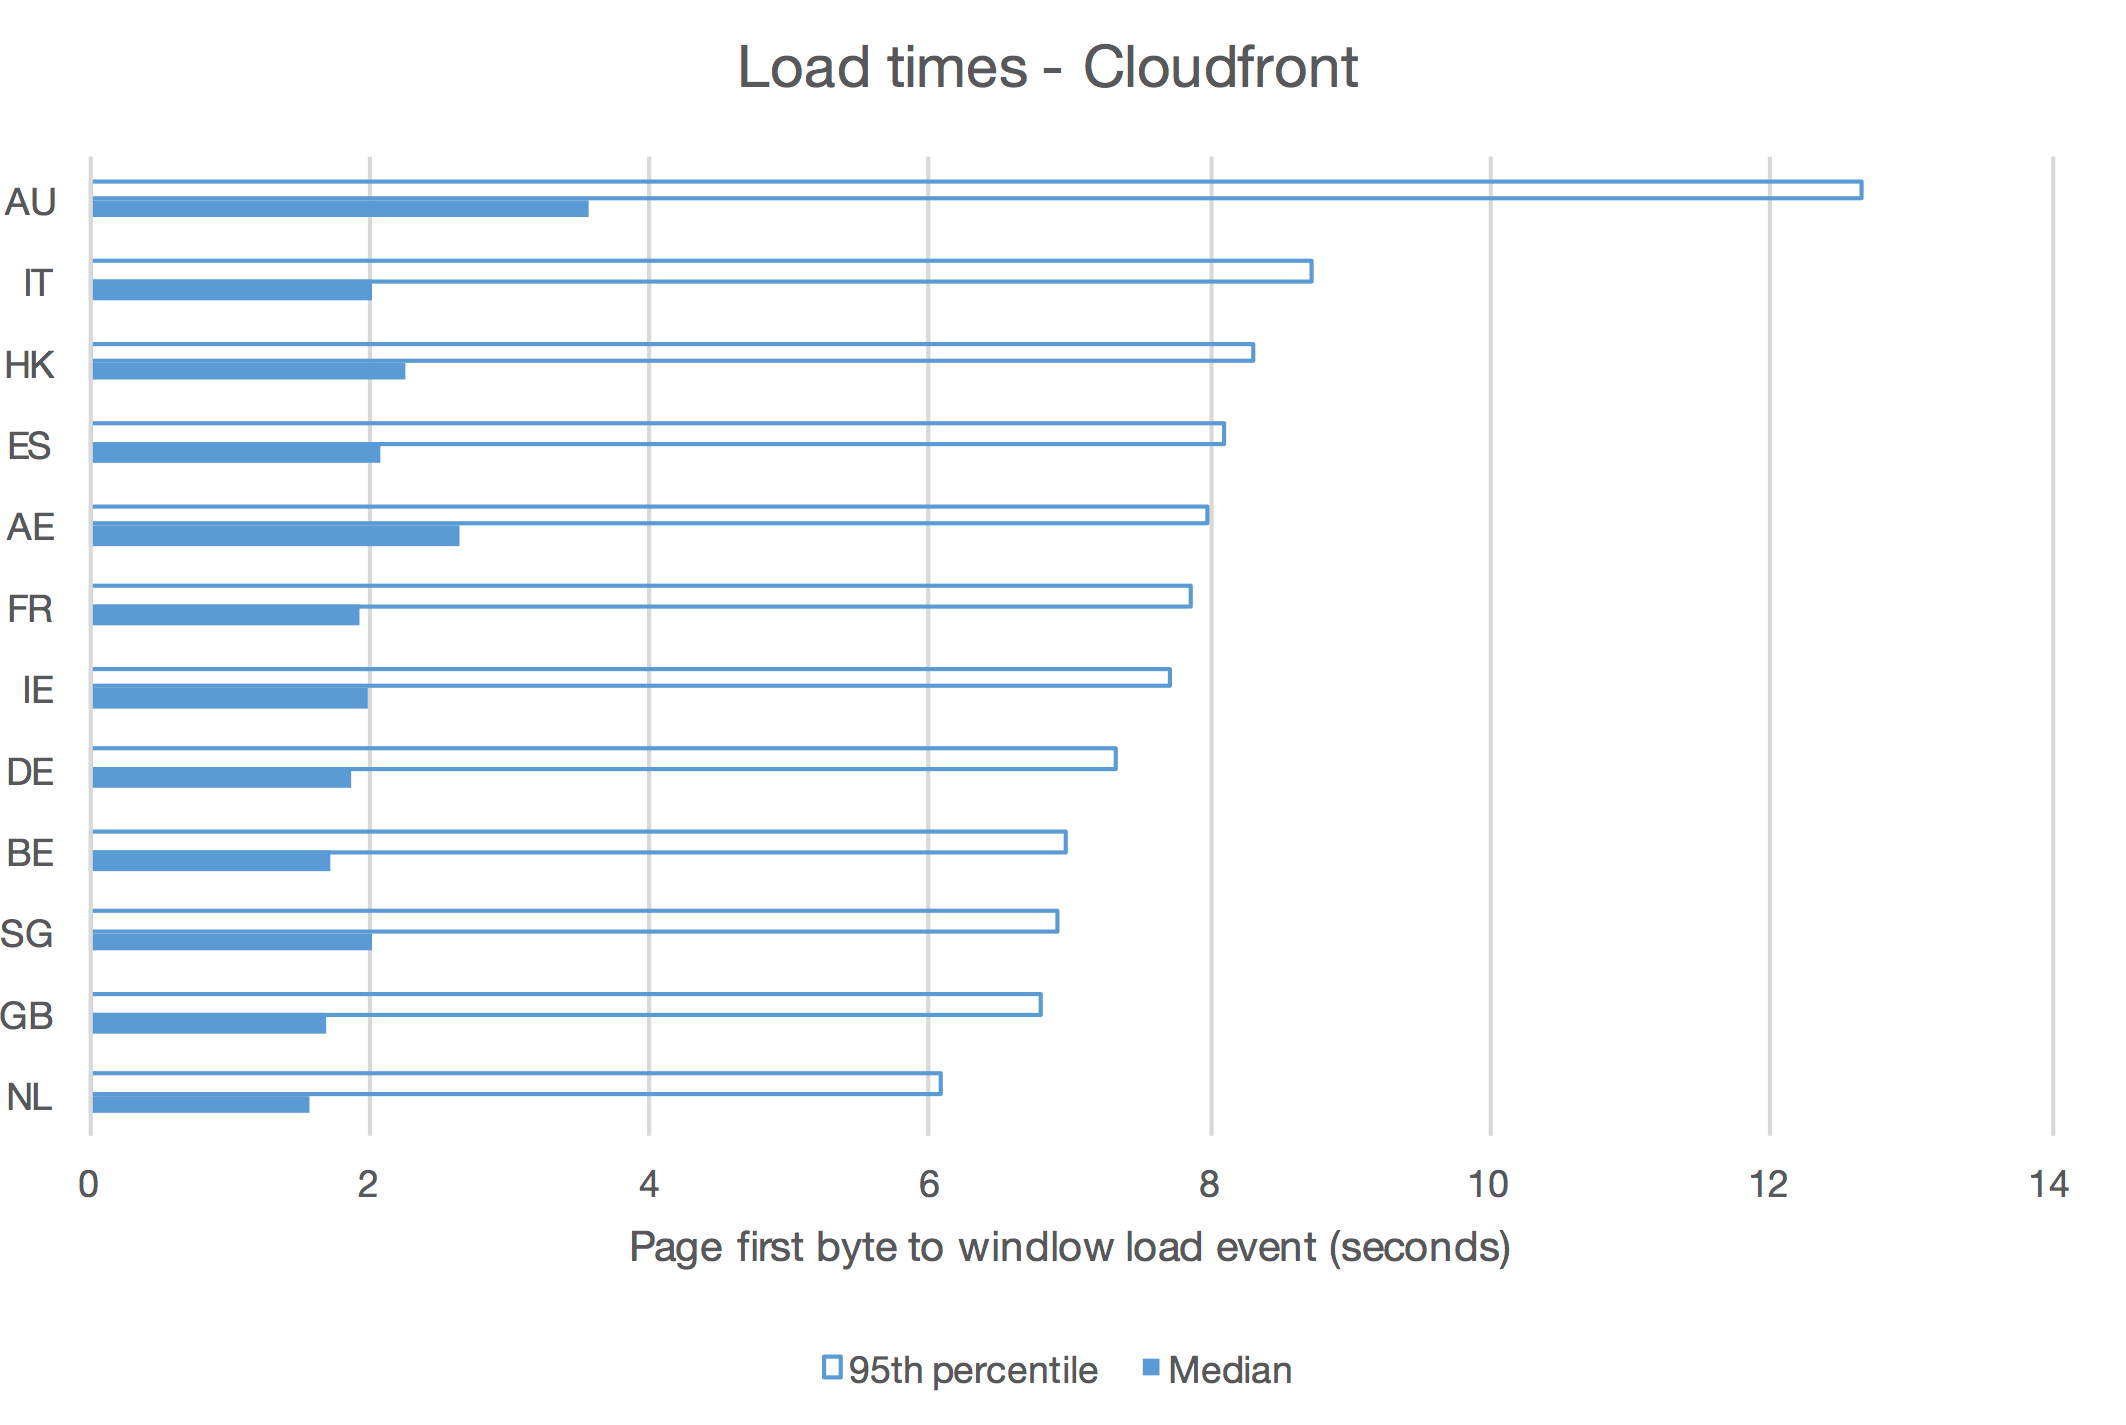 Cloudfront performance